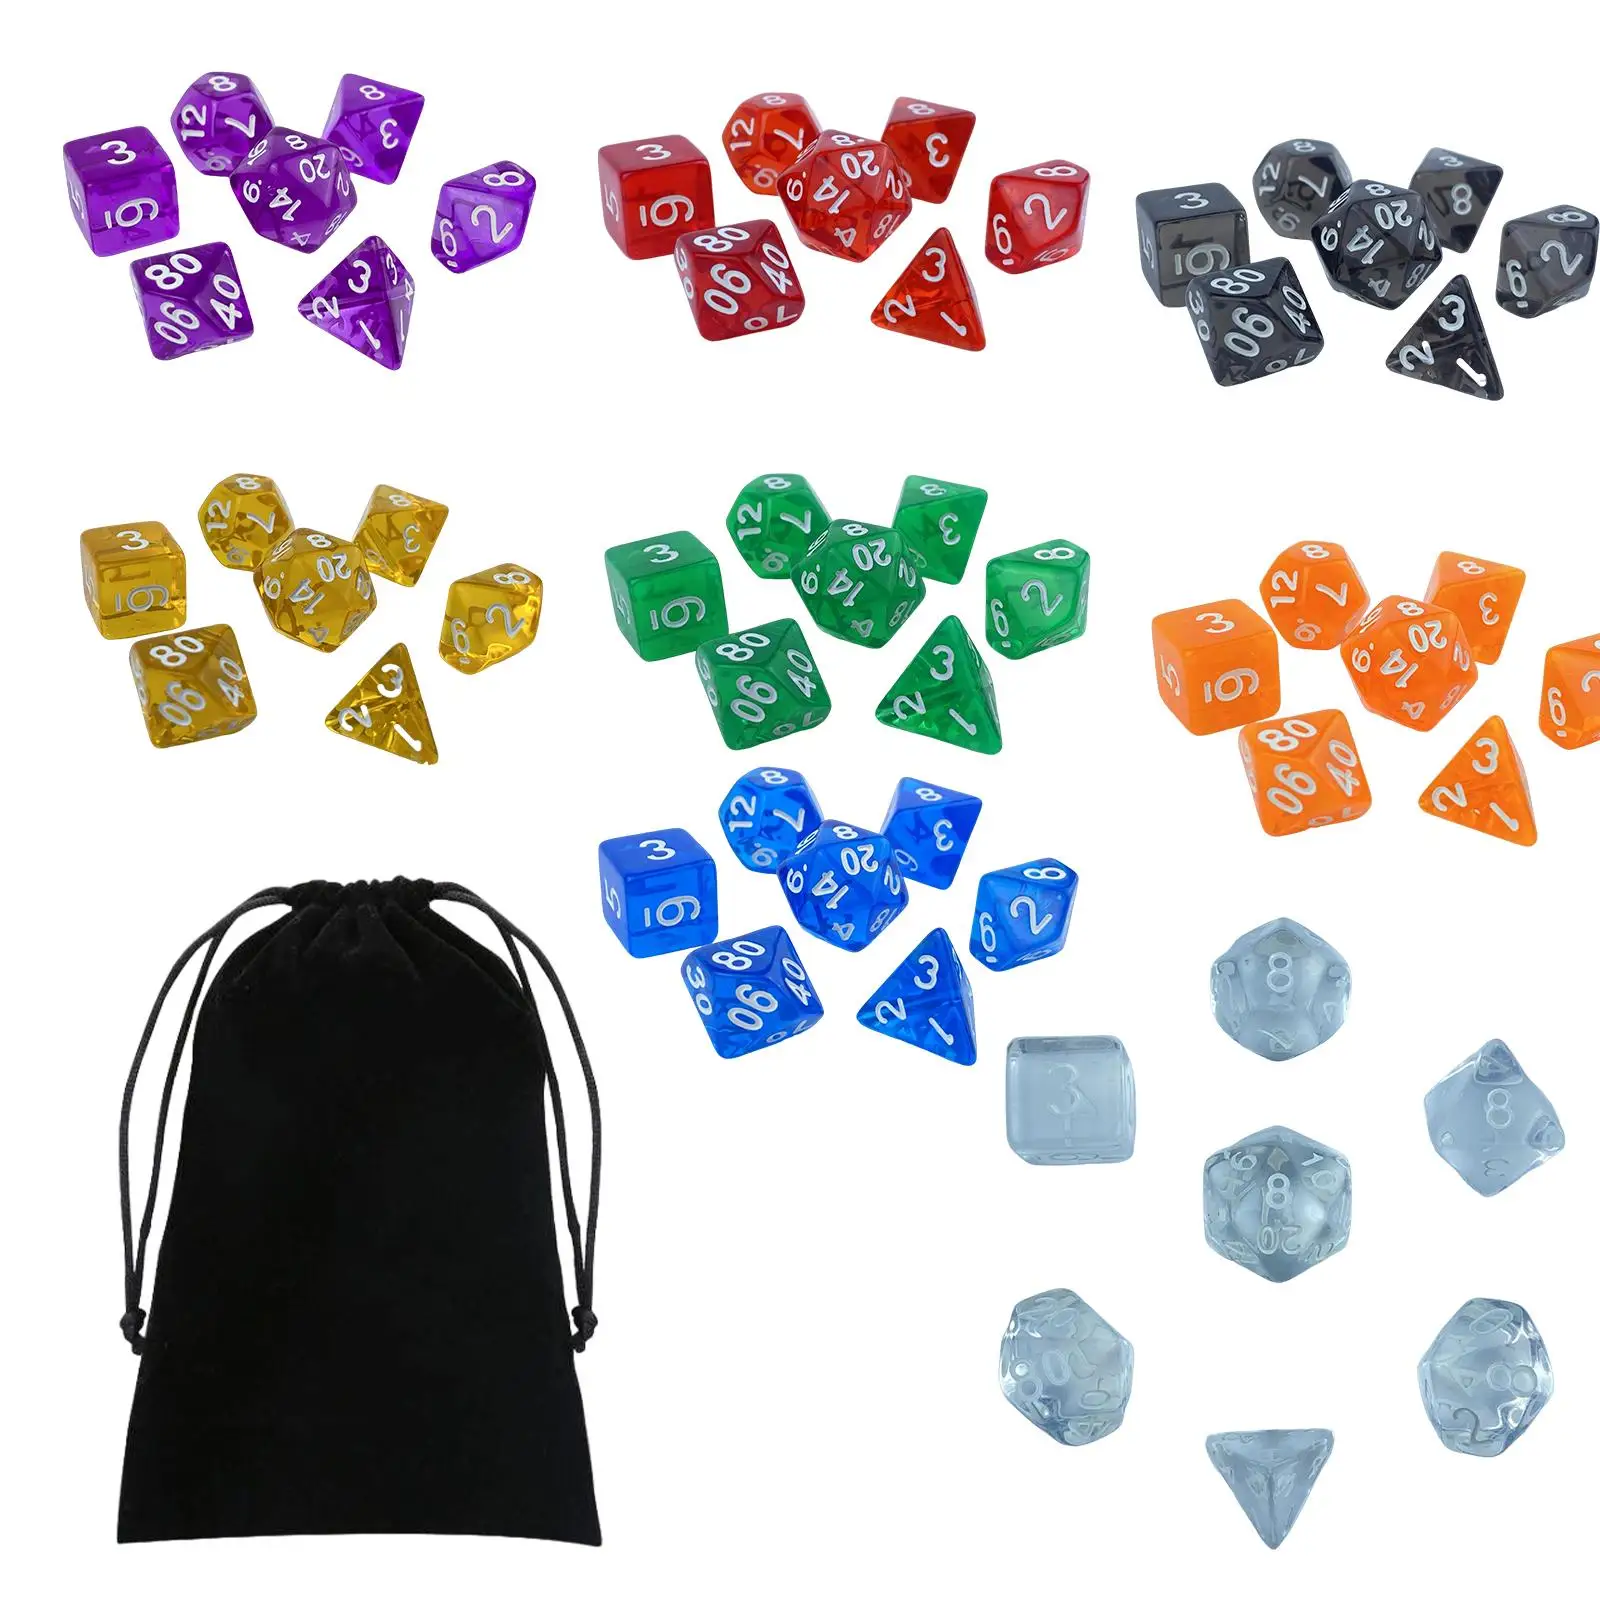 56Pcs Polyhedral Dice Game Dices for Role Play Party Favors Drinking Props